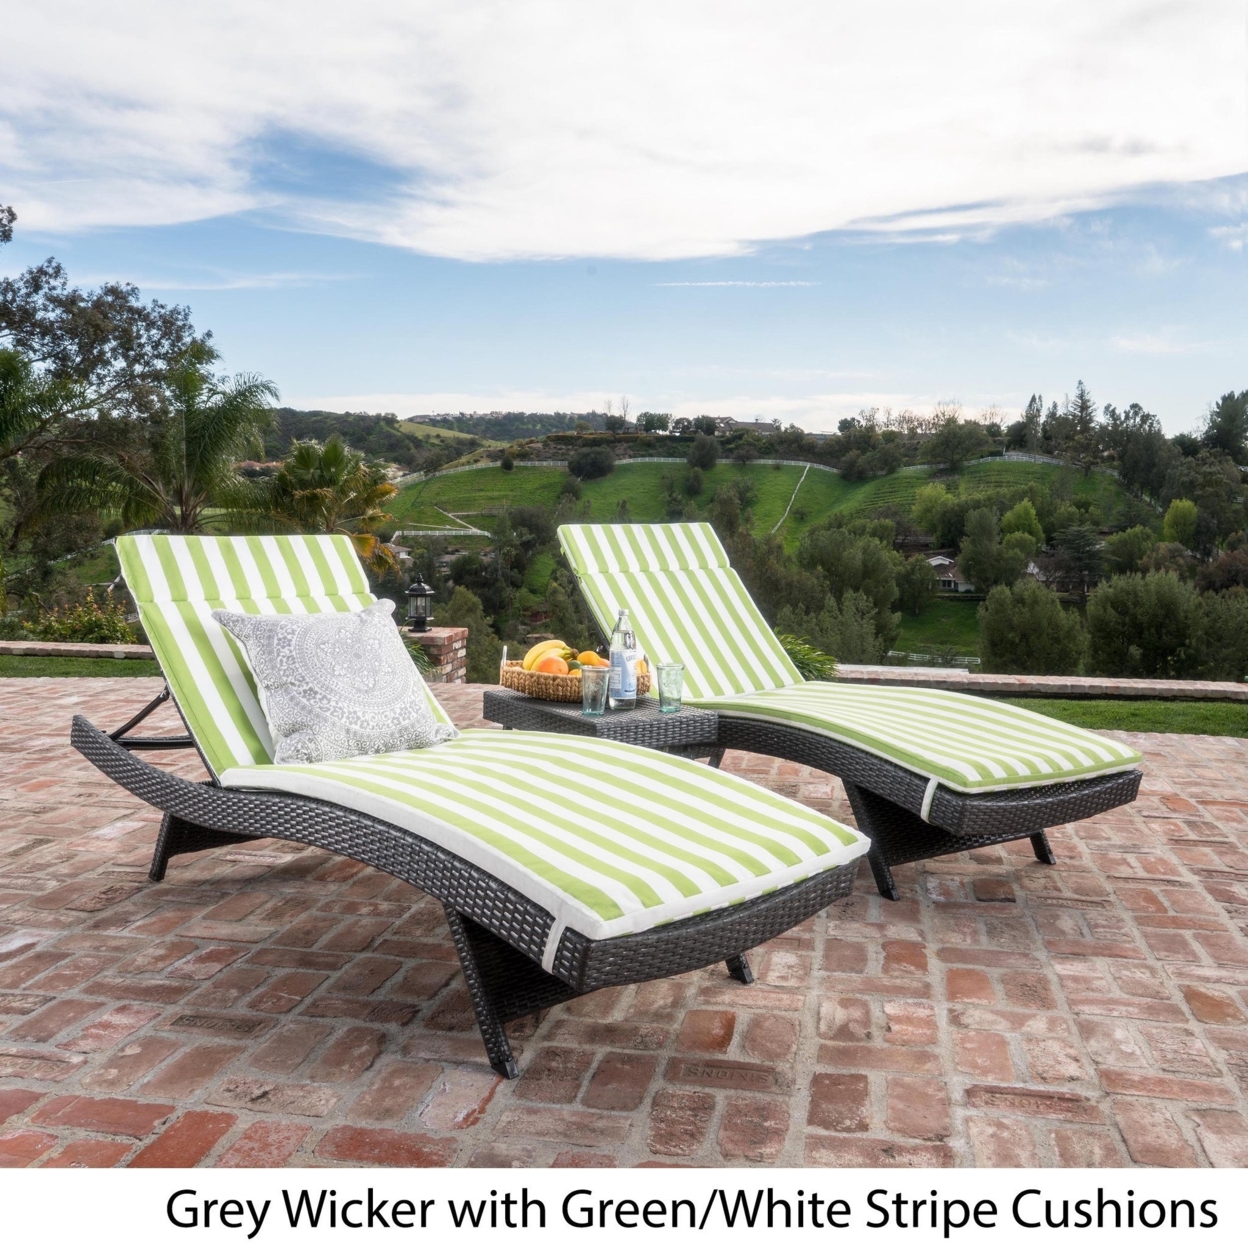 Lakeport 3pc Outdoor Wicker Chaise Lounge Chair & Table Set With Cushions - Bright Green Cushion, Gray